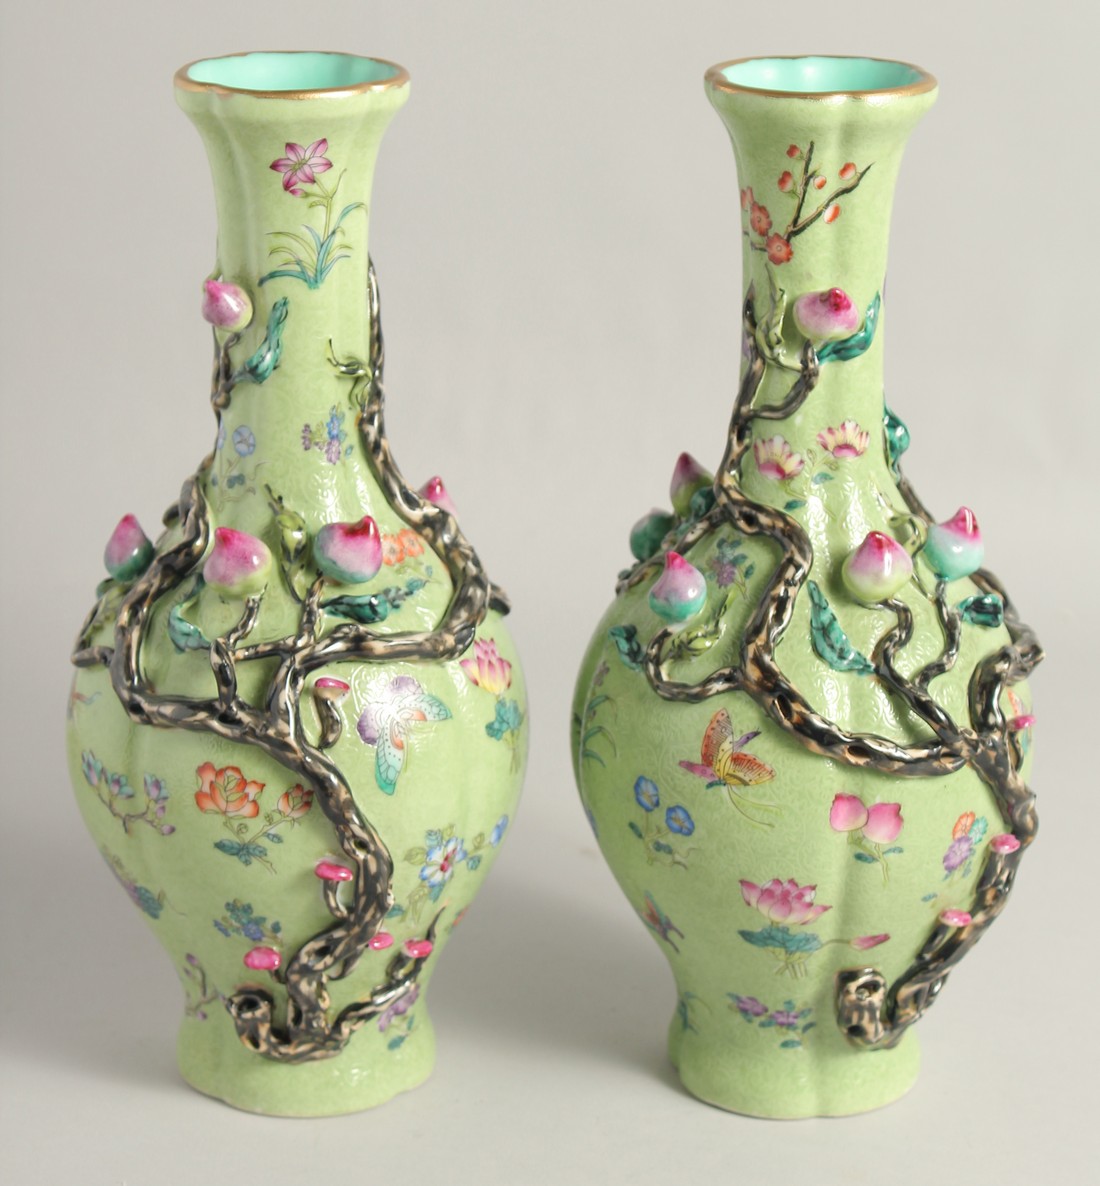 A PAIR OF CHINESE GREEN GROUND PORCELAIN VASES, with relief peach blossom and further decorated with